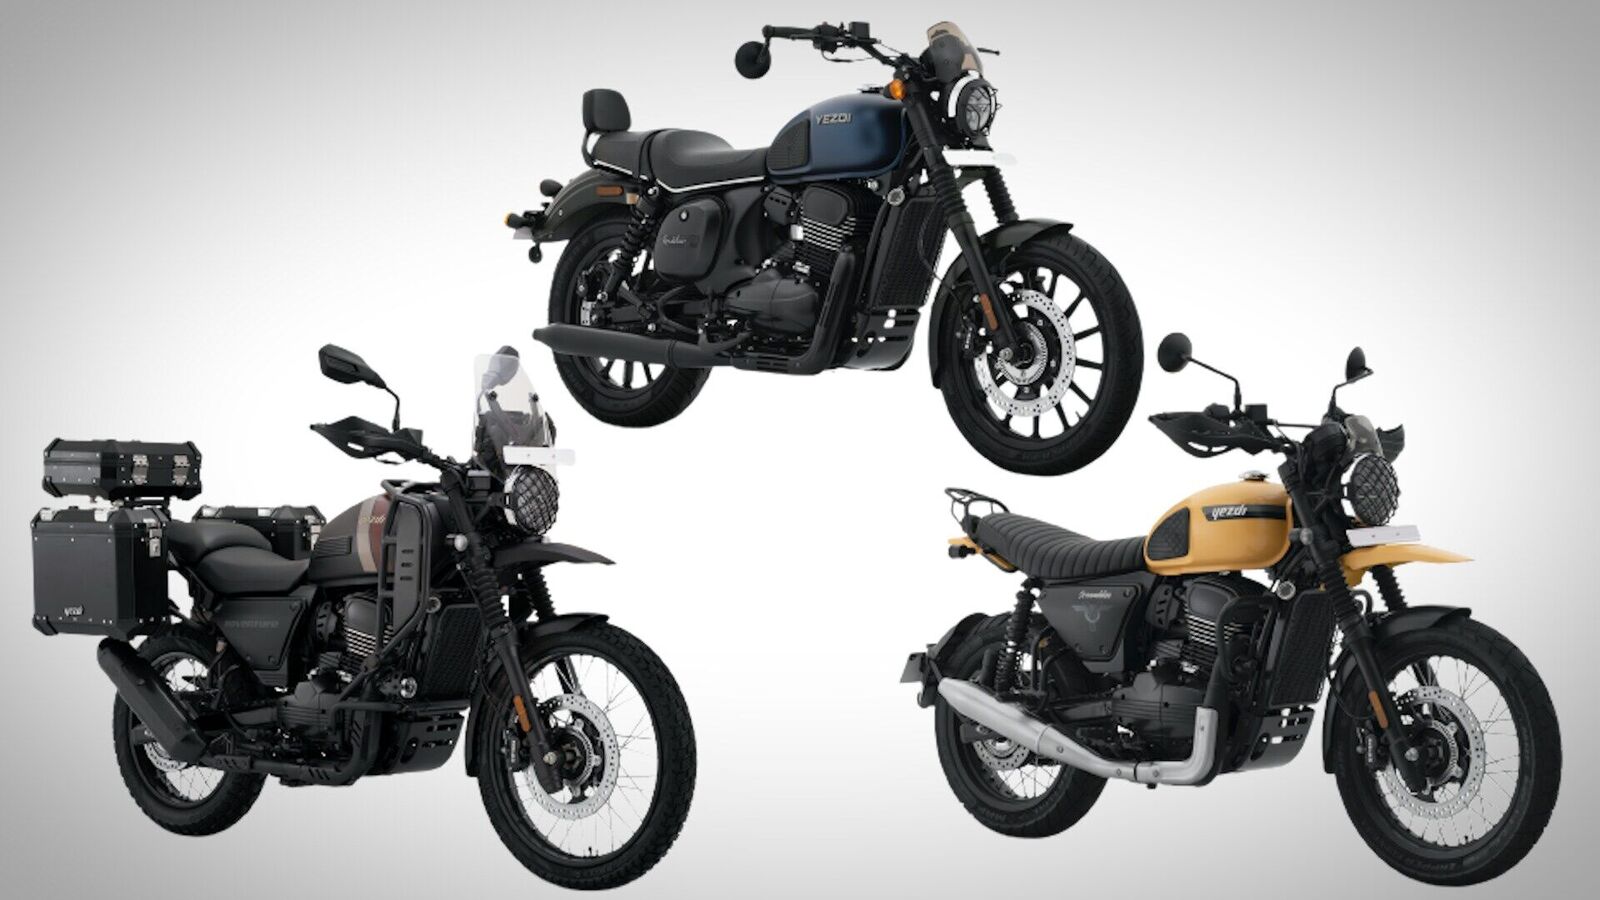 Yezdi Roadster Scrambler And Adventure Bikes Launched Price Features Specs